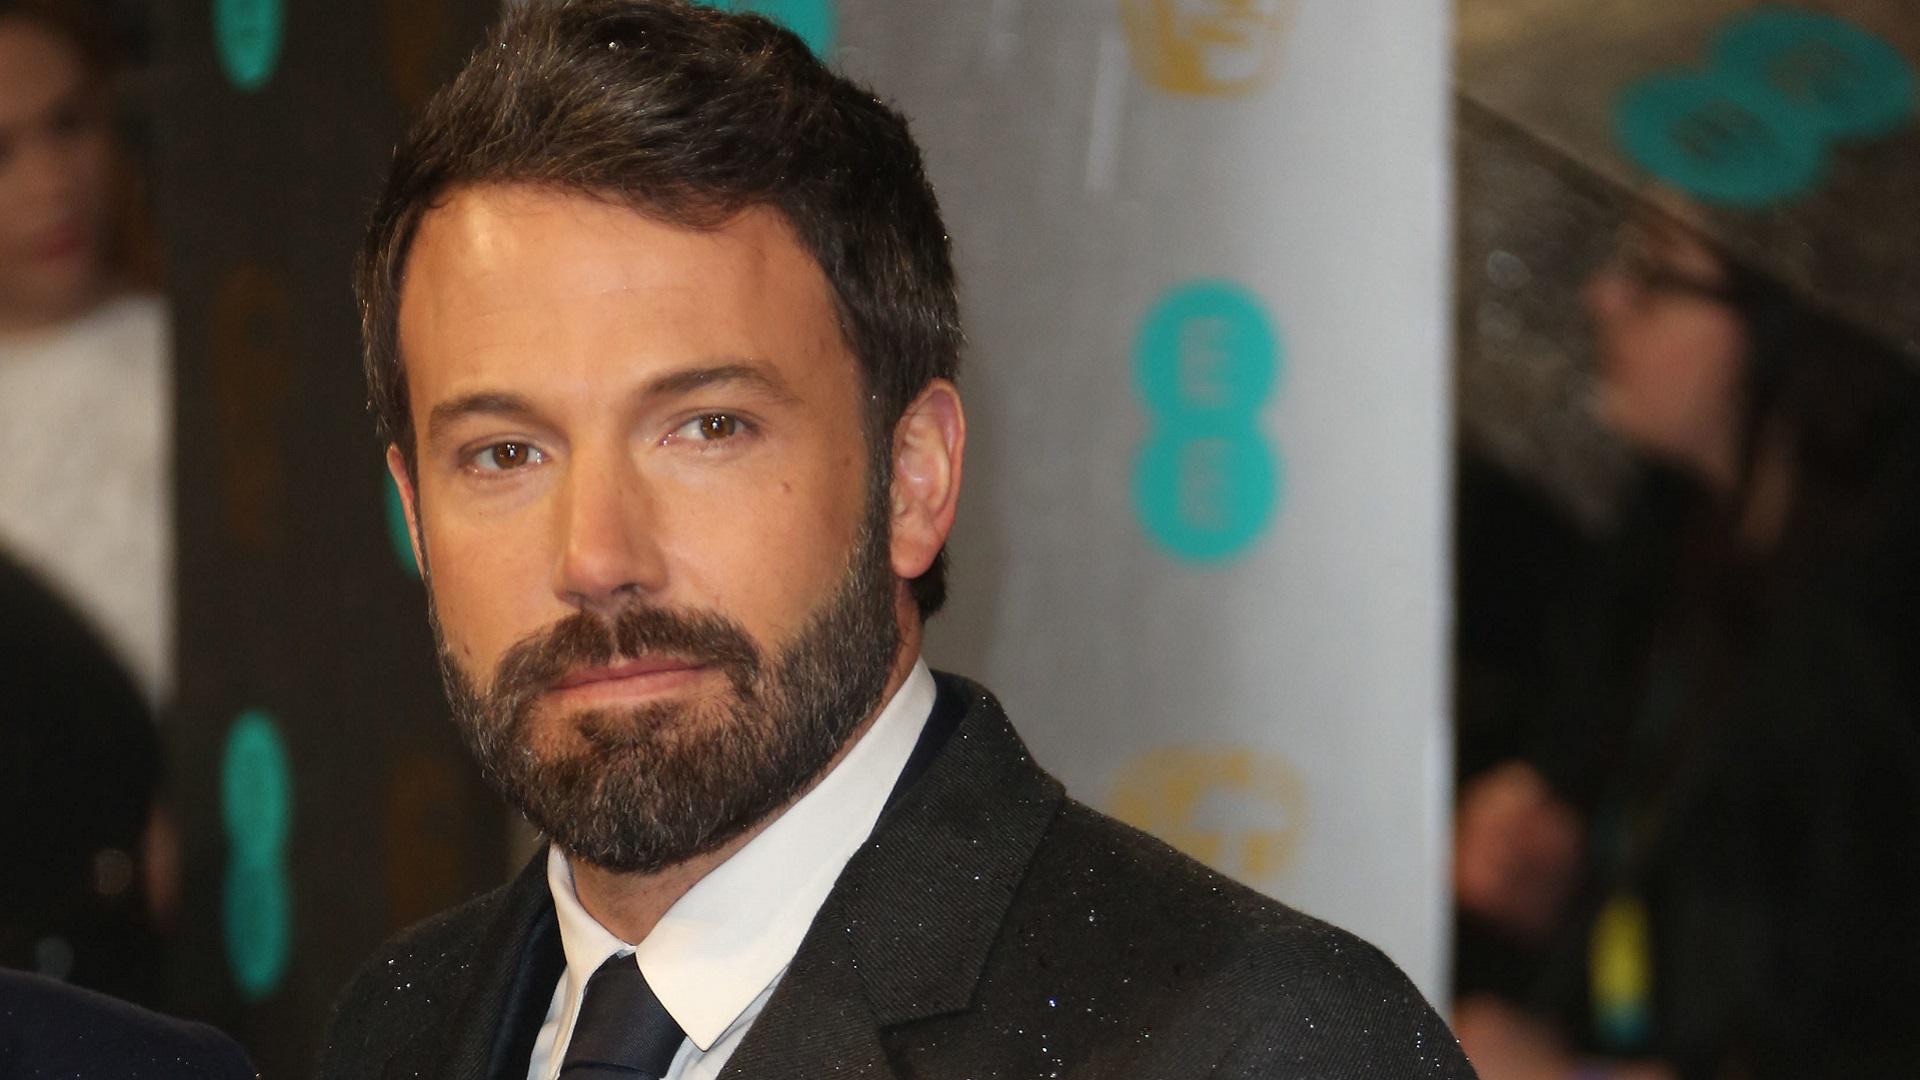 Watch Ben Affleck Look Like He’s About To Cry When Told About Negative